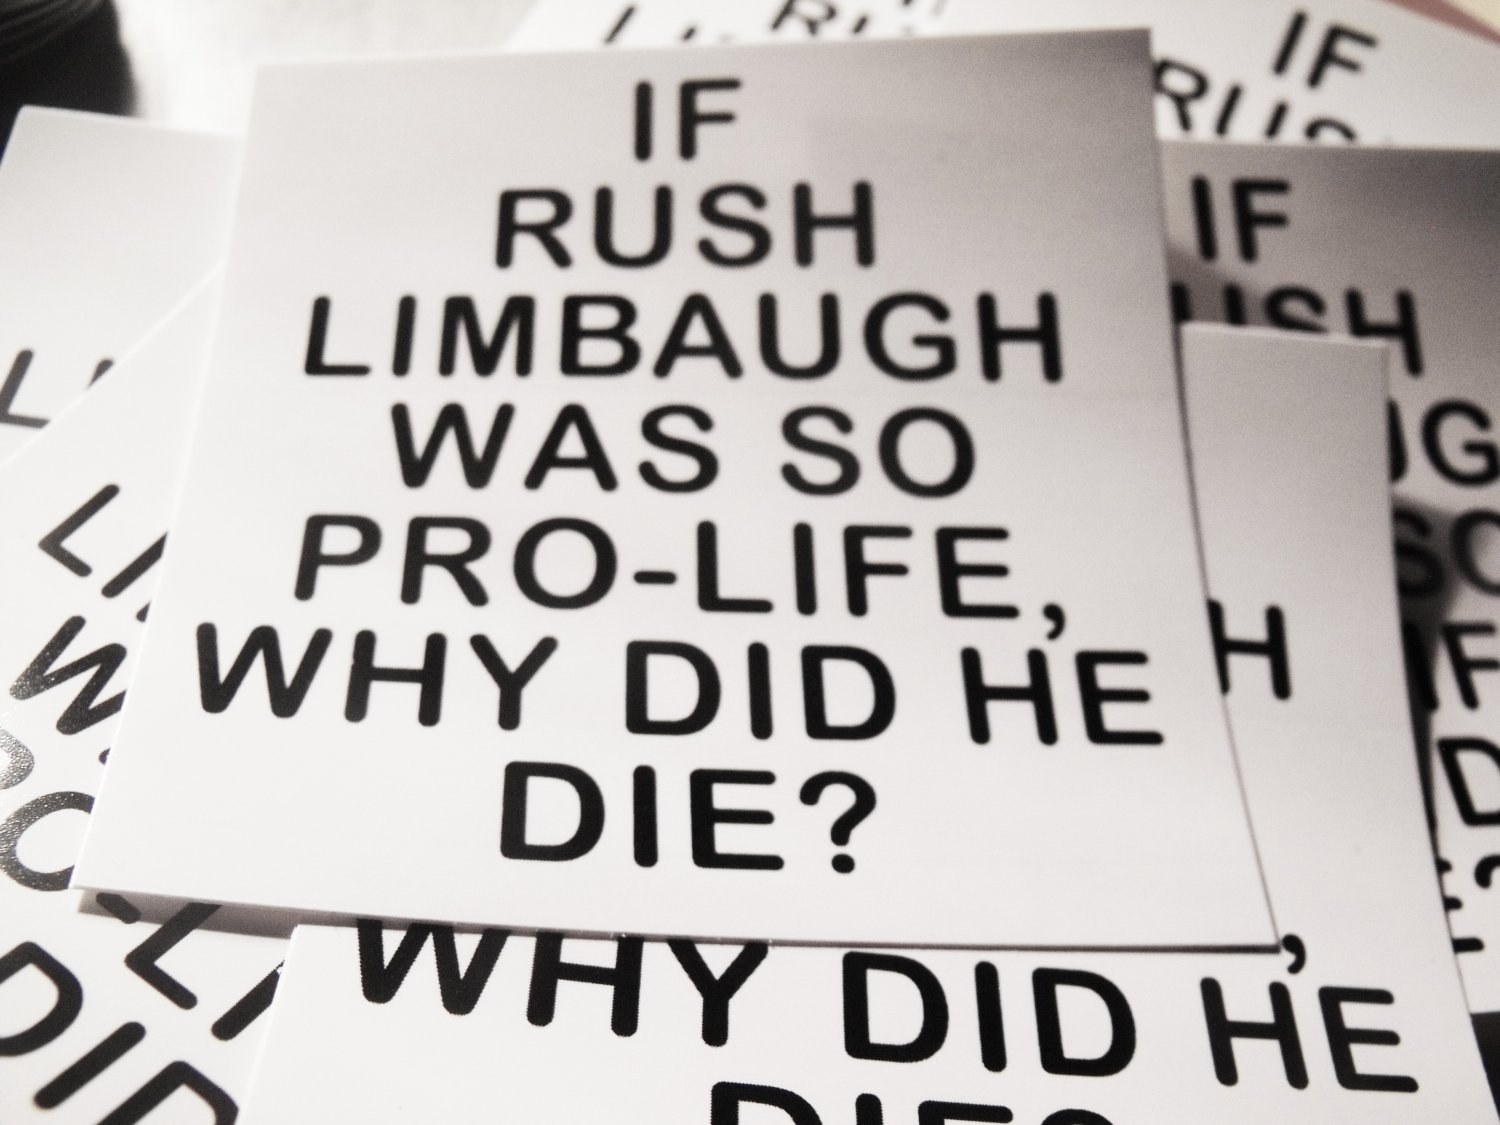 25  IF RUSH LIMBAUGH WAS SO PRO-LIFE, WHY DID HE DIE?  2.5" x 2.5"  stickers